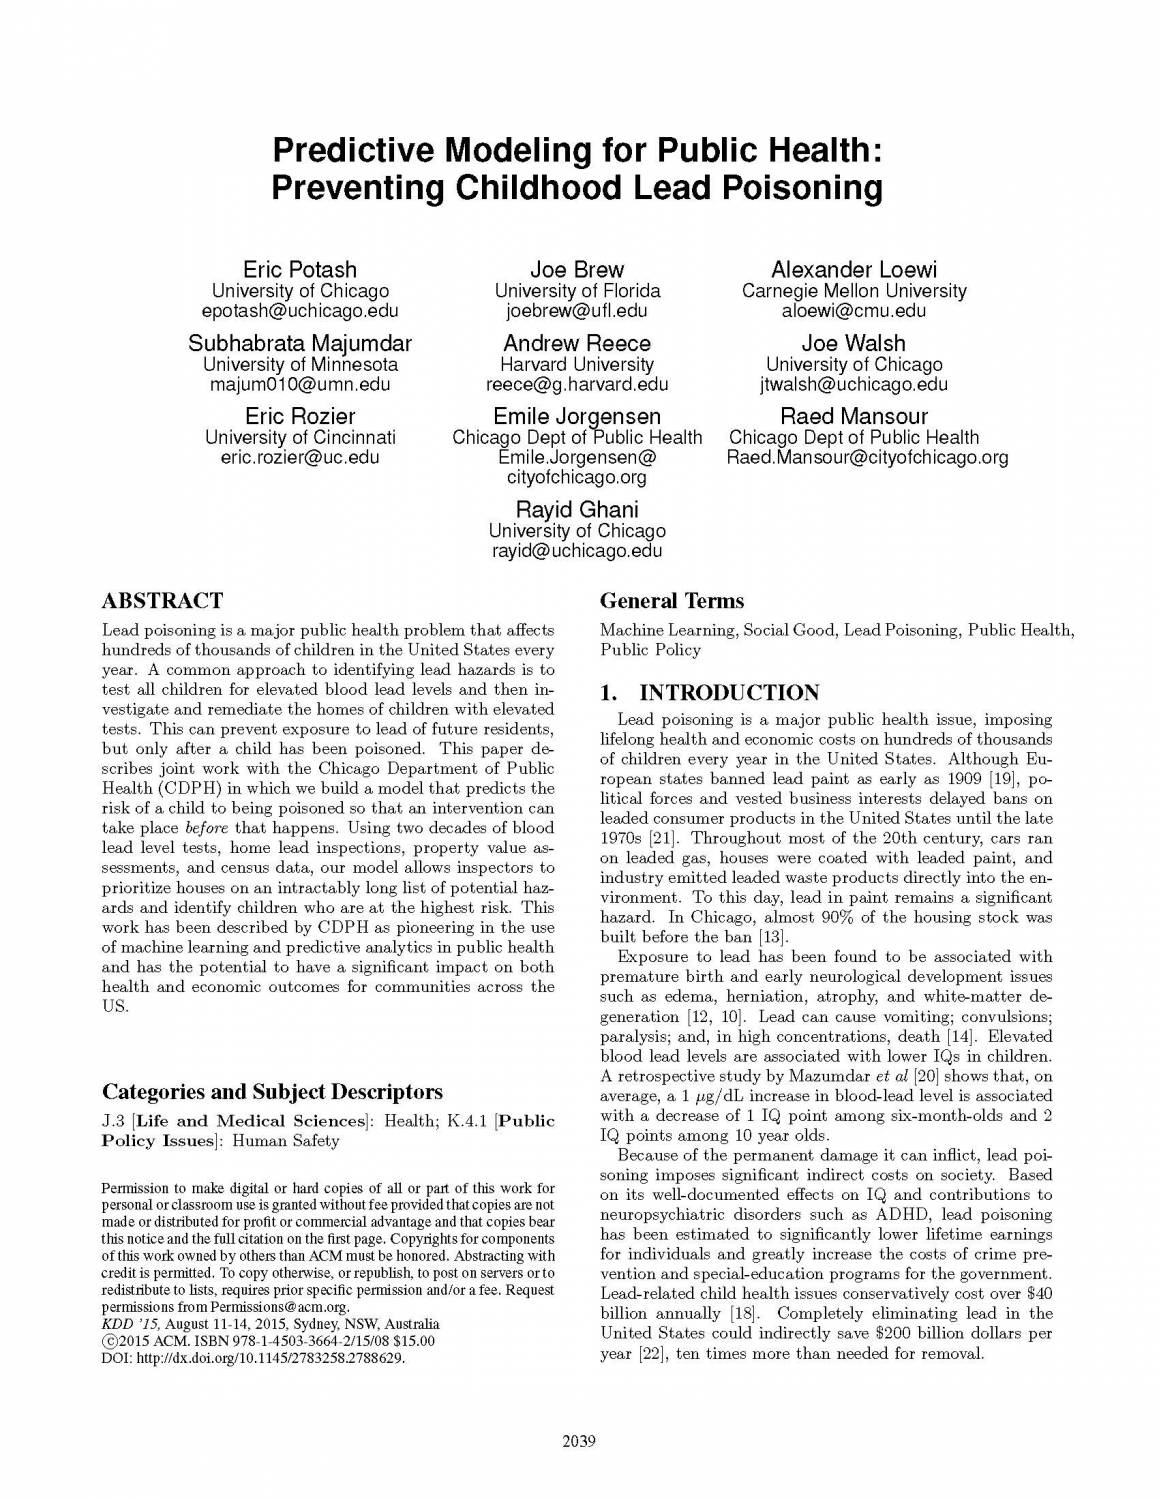 Predictive Modeling for Public Health: Preventing Childhood Lead Poisoning